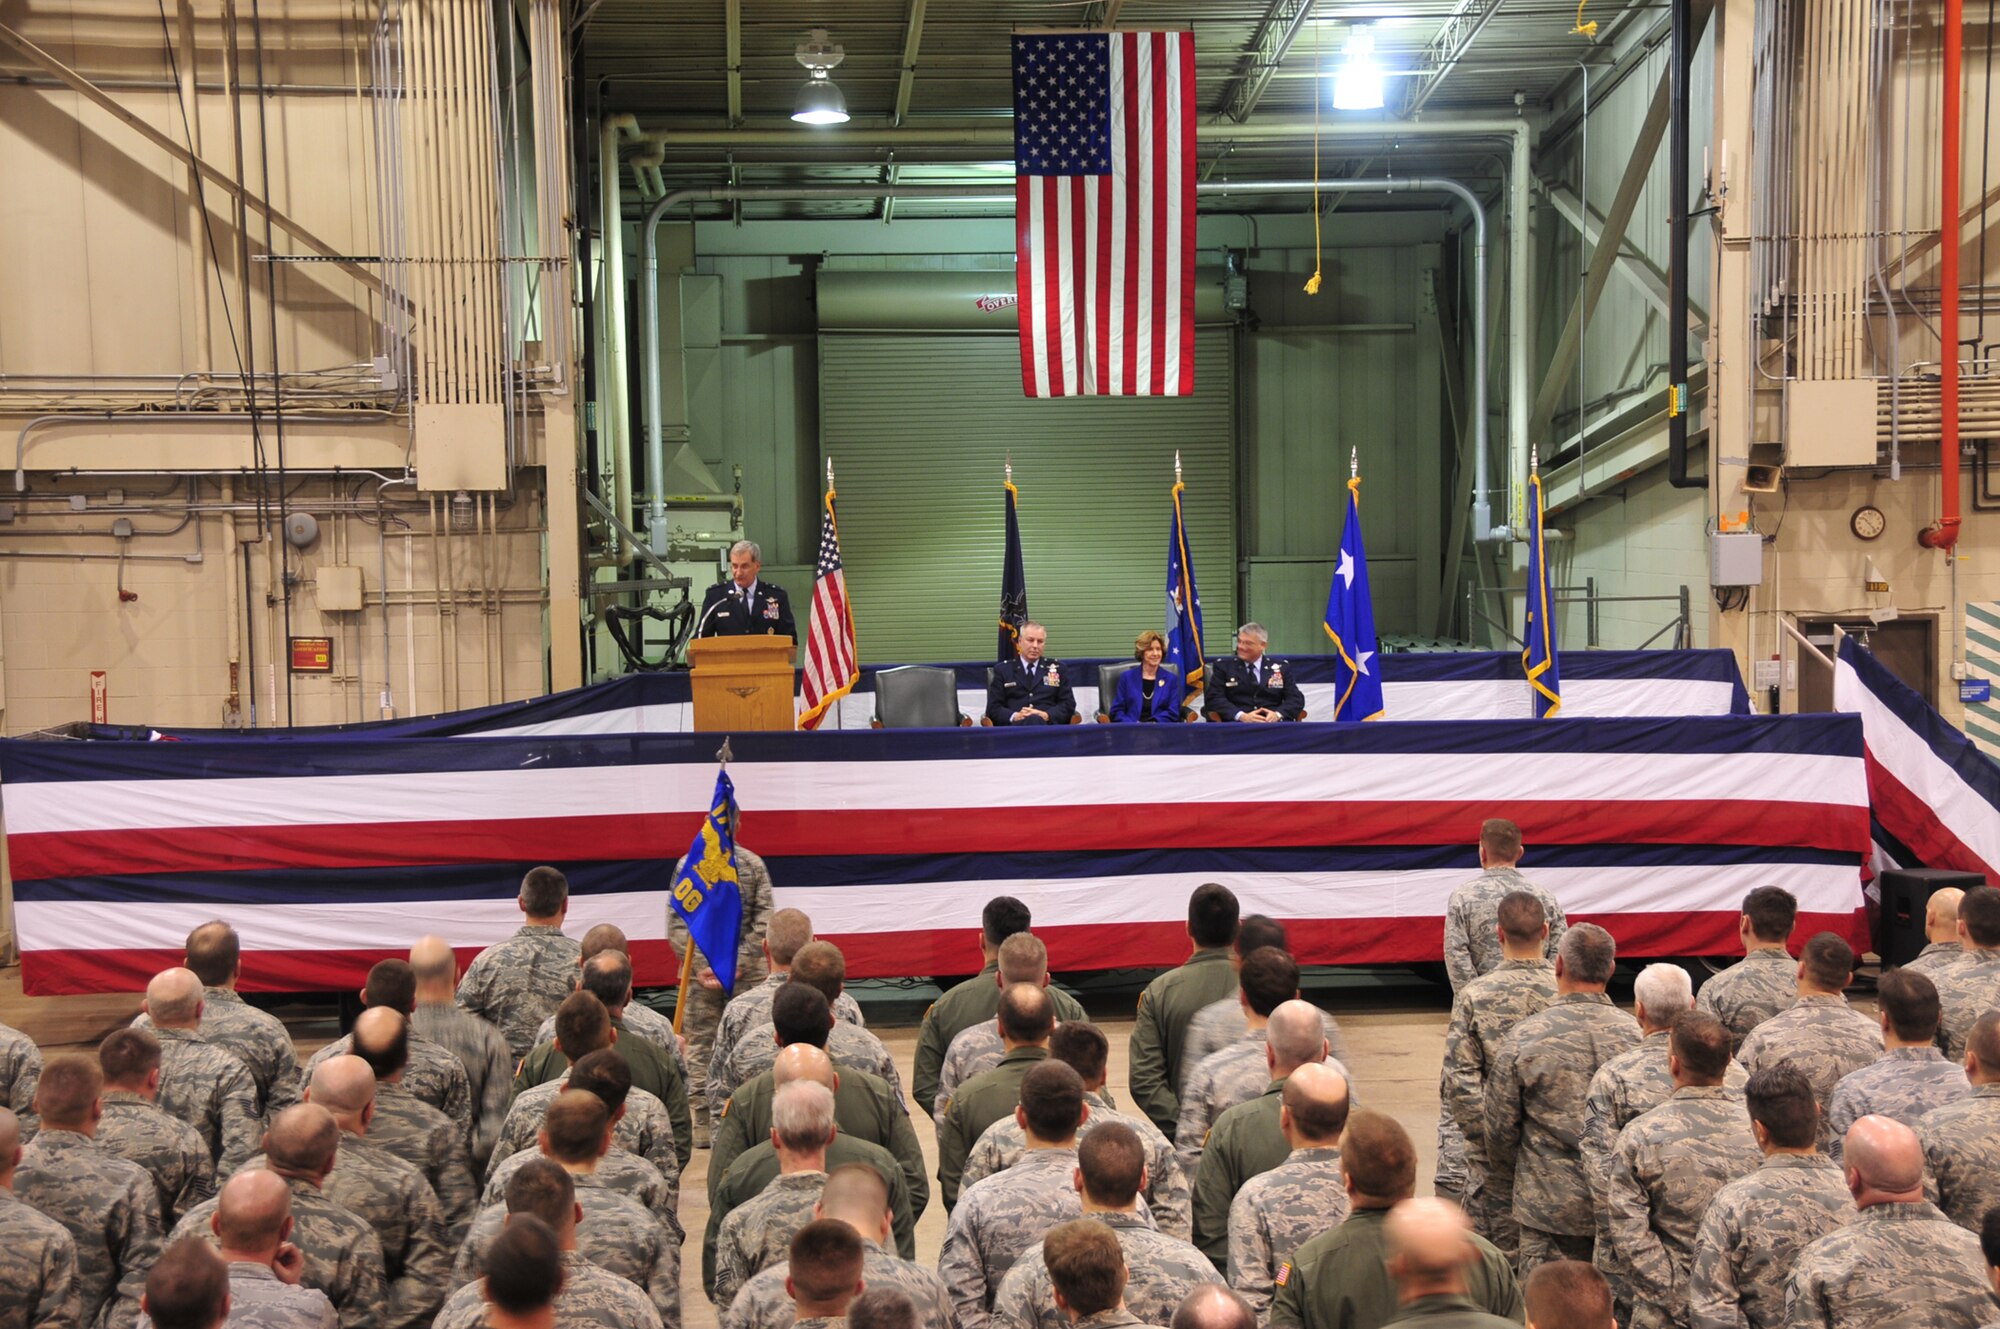 The 171st Air Refueling Wing hosts a change of command ceremony Sunday, Feb. 5.  Col. Anthony J. Carrelli accepts command of the 171st Air Refueling Wing from Brig. Gen. Roy Uptegraff who served as the unit's wing commander since 2006. Maj. Gen. Stephen Sischo, commander of the Pennsylvania Air National Guard, is the official host of the ceremony and is joined by distinguished military officials and community leaders. 

(National Guard photo by Master Sgt. Ann Young/Released)